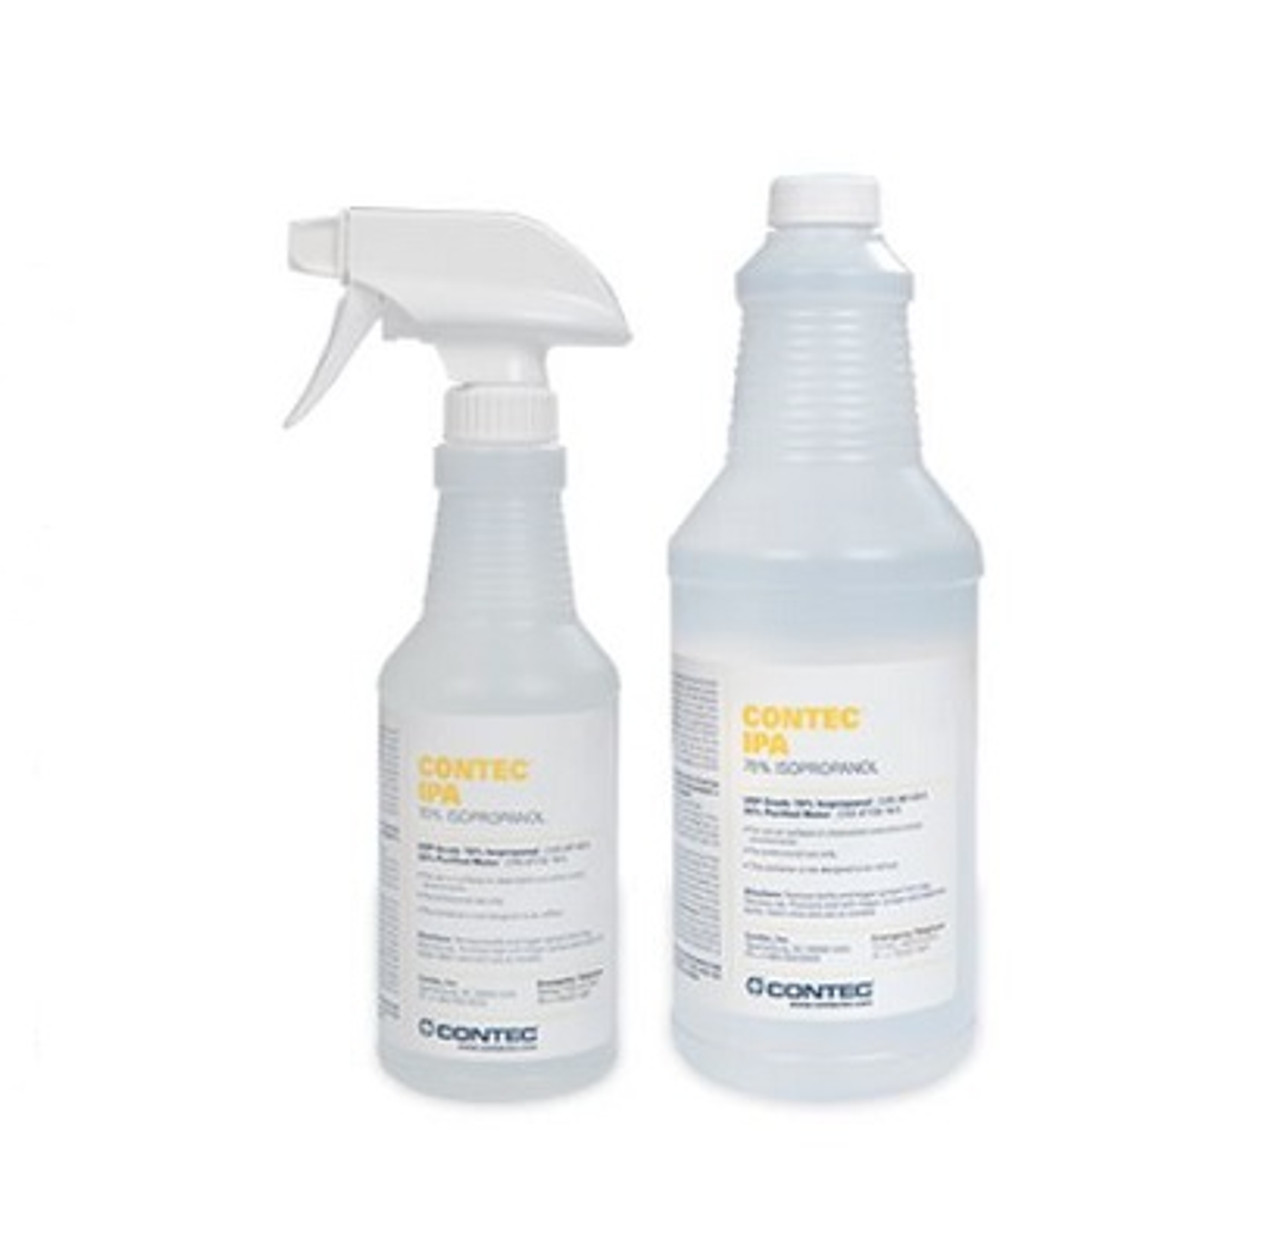 Isopropyl Alcohol - IPA 70% (4-1 Gallon) Made in USA - High Purity Alcohol  - Includes an Empty Trigger Spray Bottle